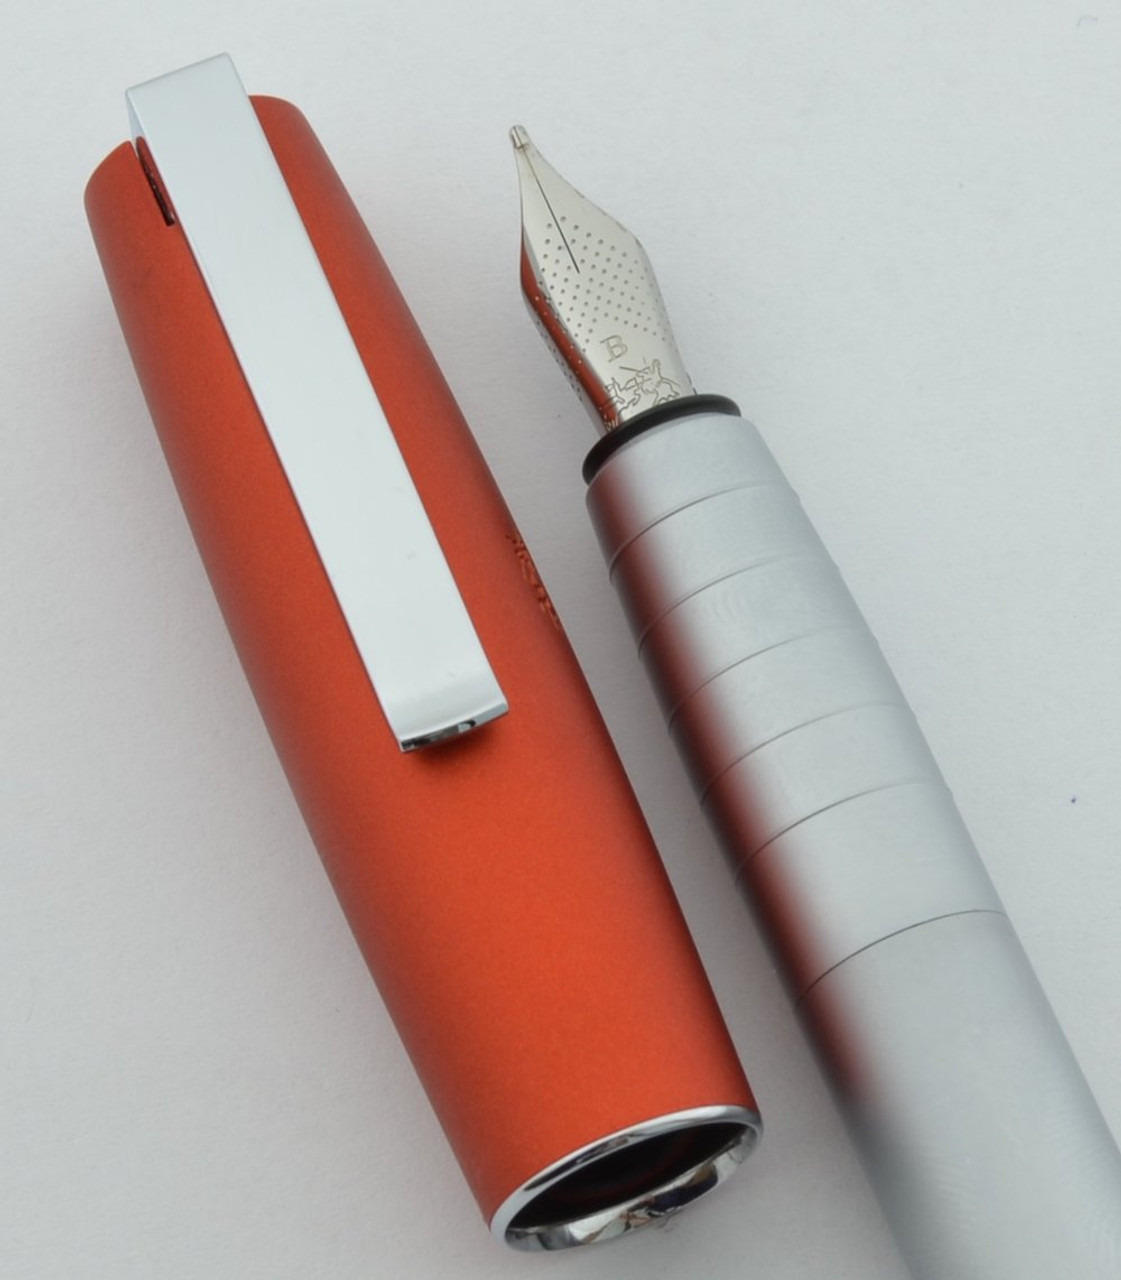 A look at the Faber-Castell Loom fountain pen.